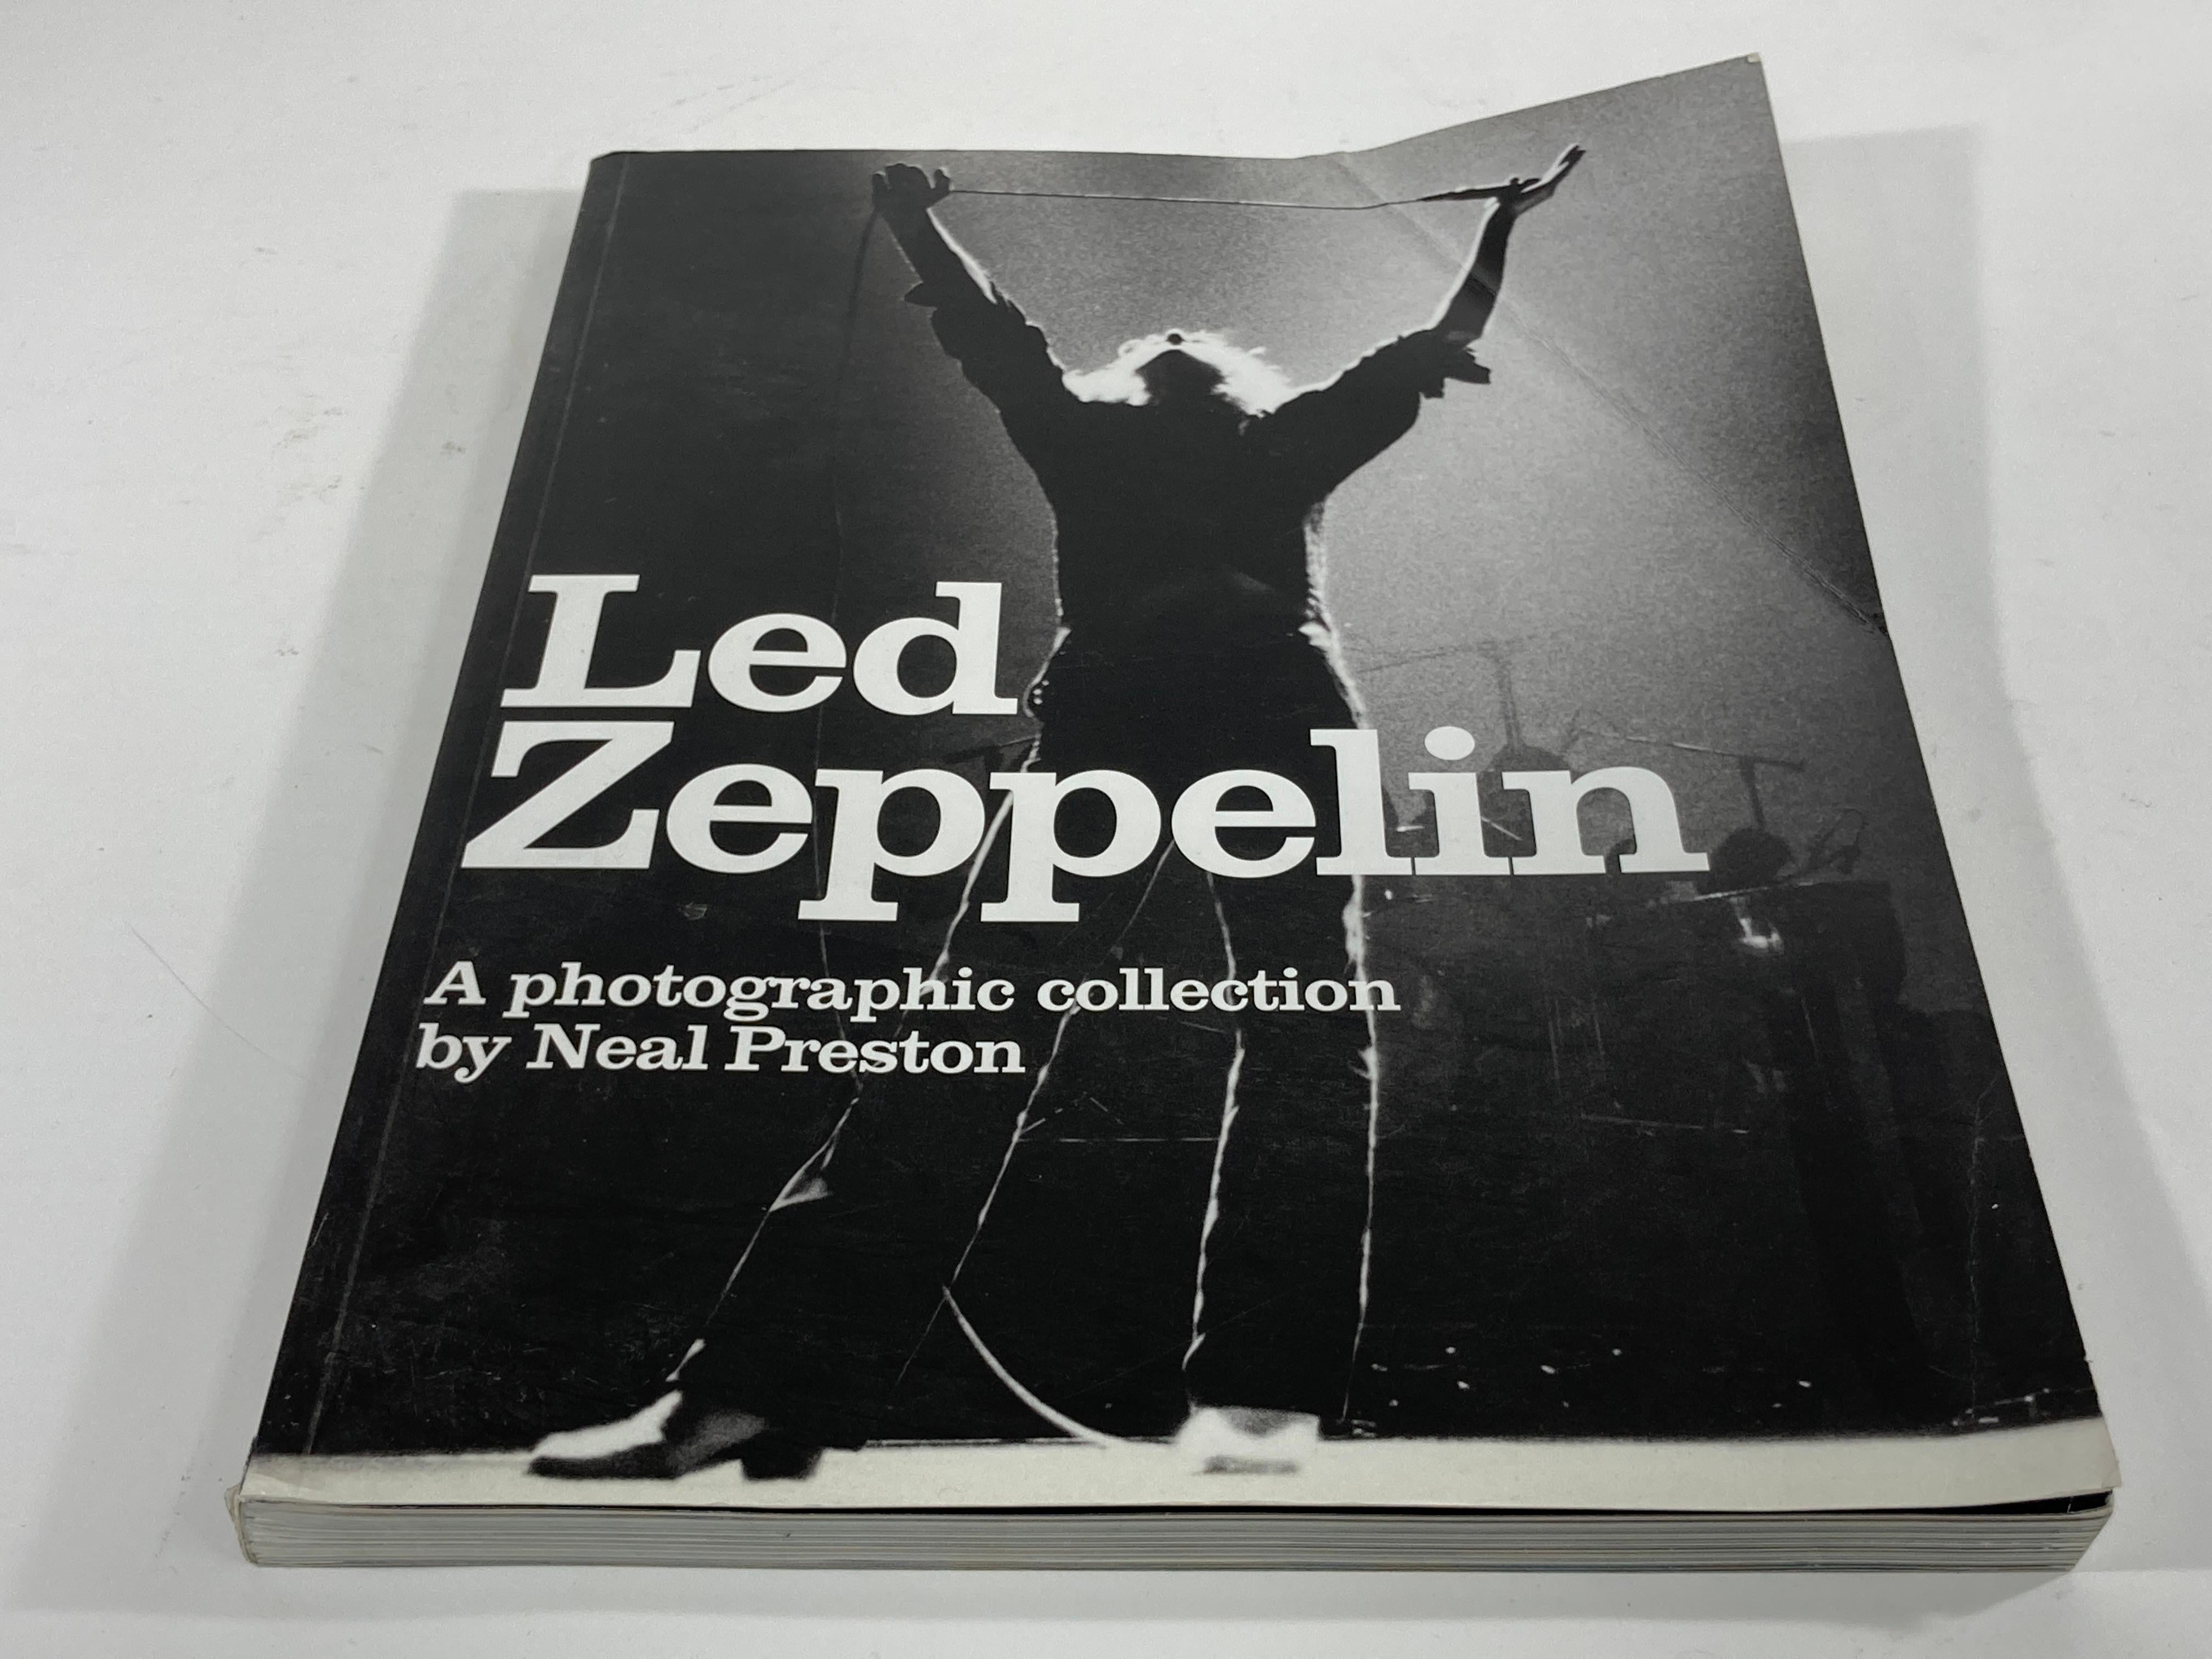 Led Zeppelin: A Photographic Collection Book by Neal Preston.
1st Edition: 2002, out of print.
Author: Neal Preston.
Softcover book.
192 page large photo history book of the legendary rock band Led Zeppelin.This is a huge soft cover